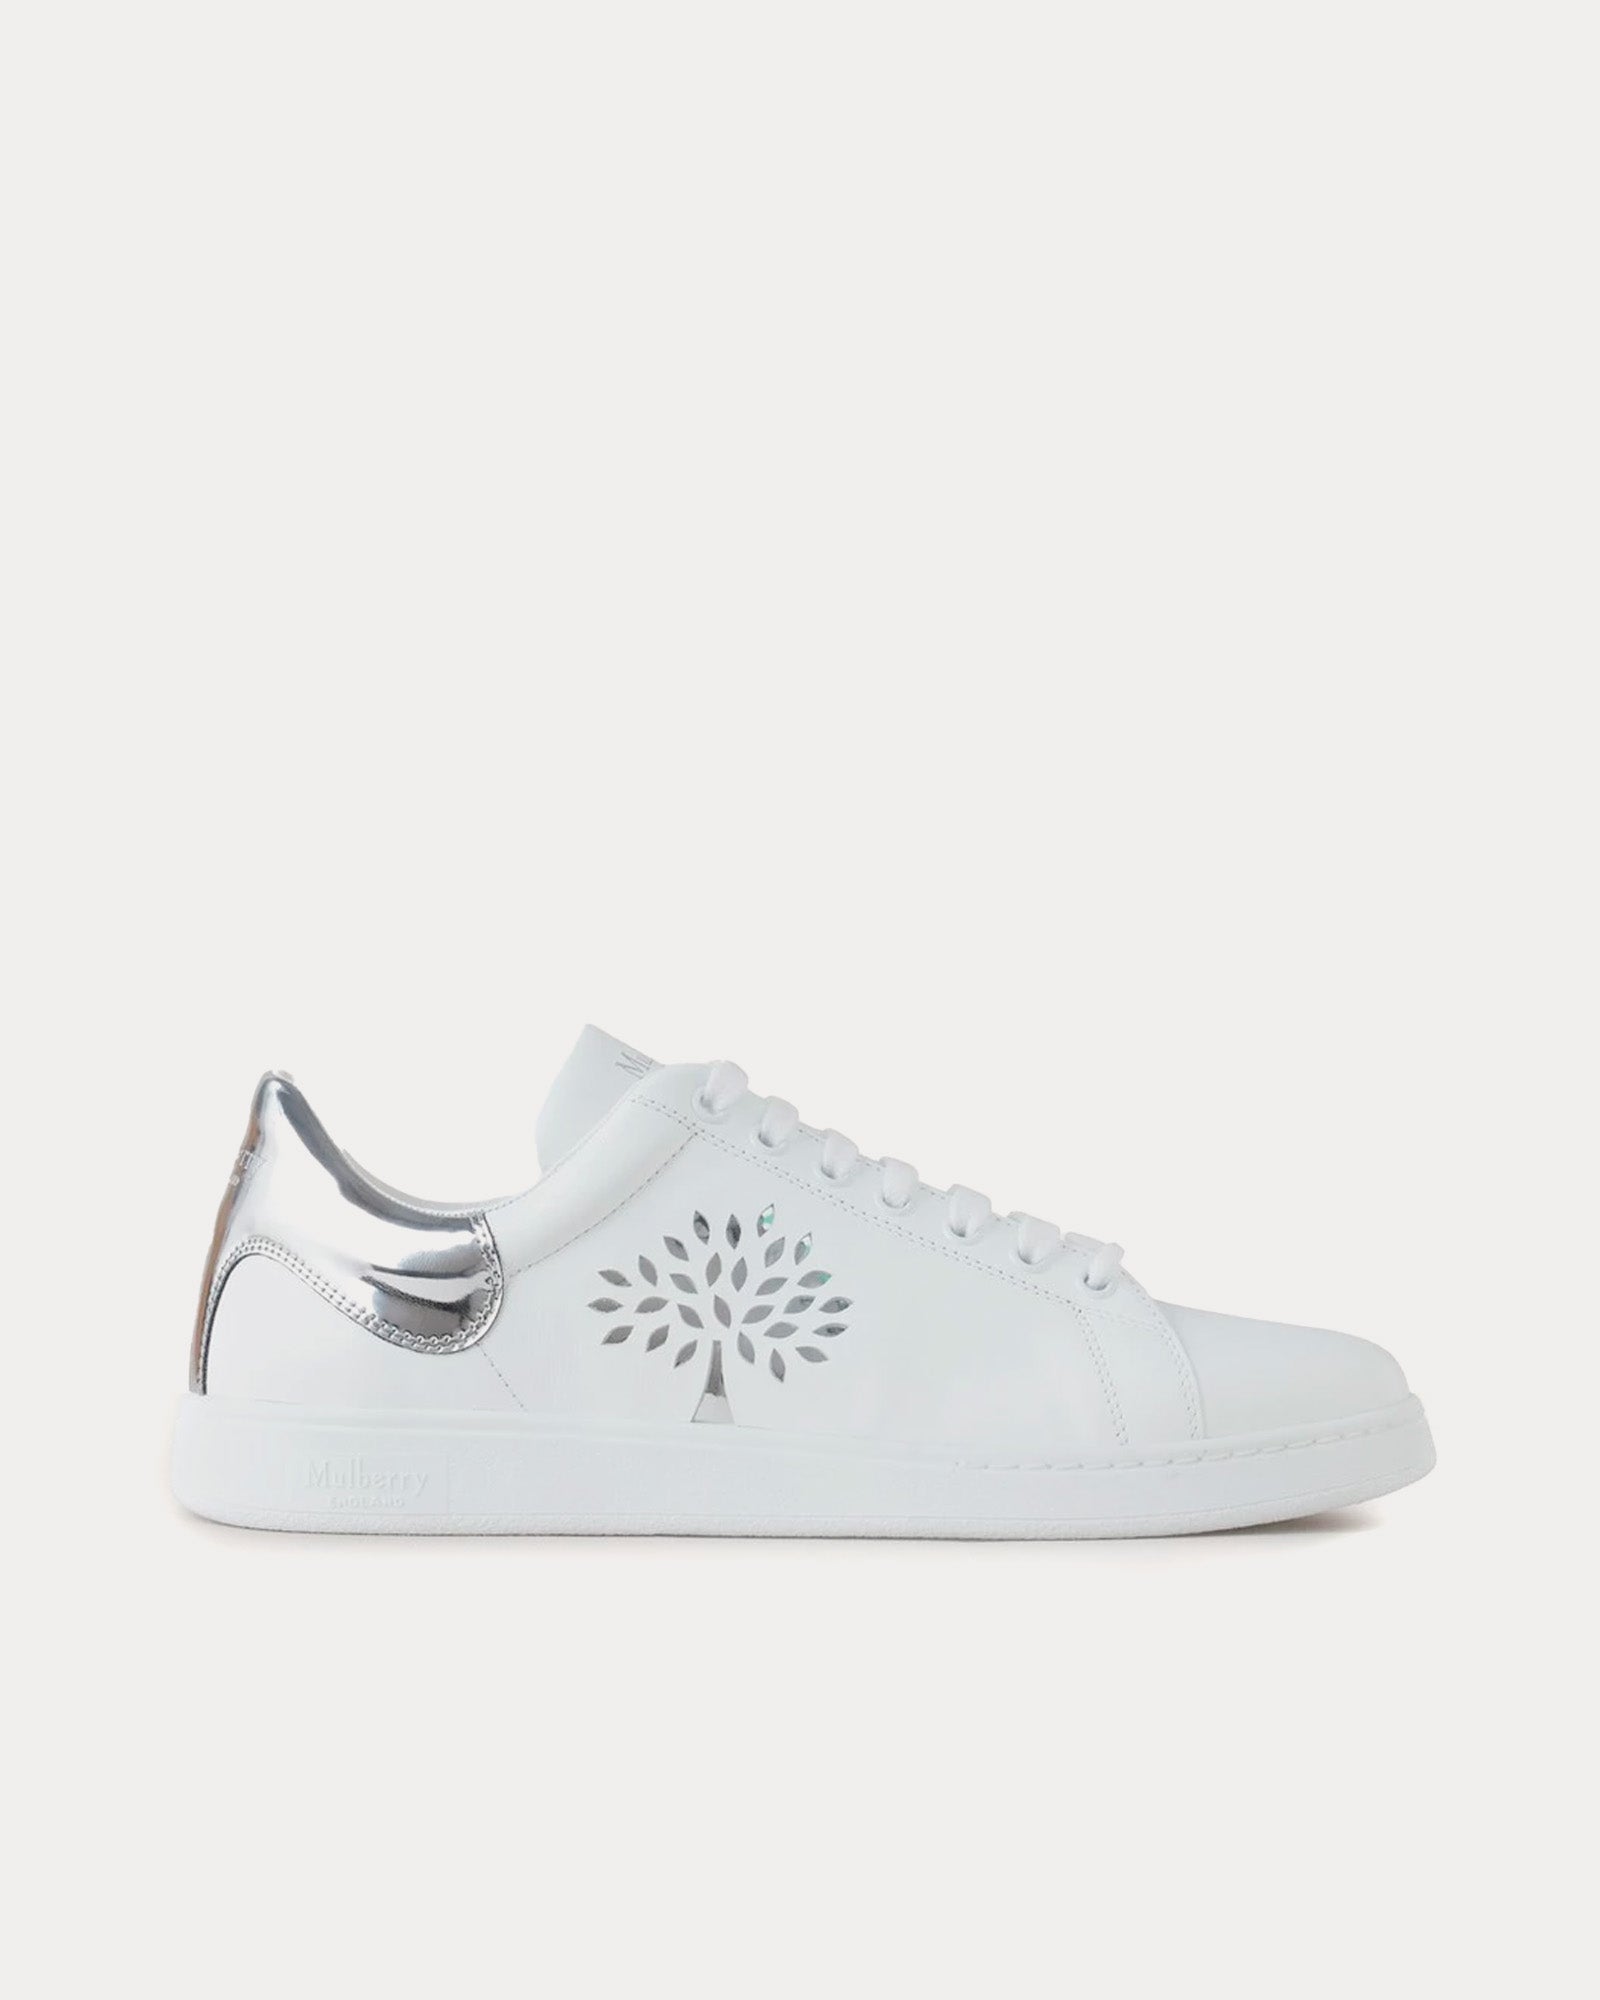 Mulberry - Tree Tennis Bovine Leather White / Silver Low Top Sneakers